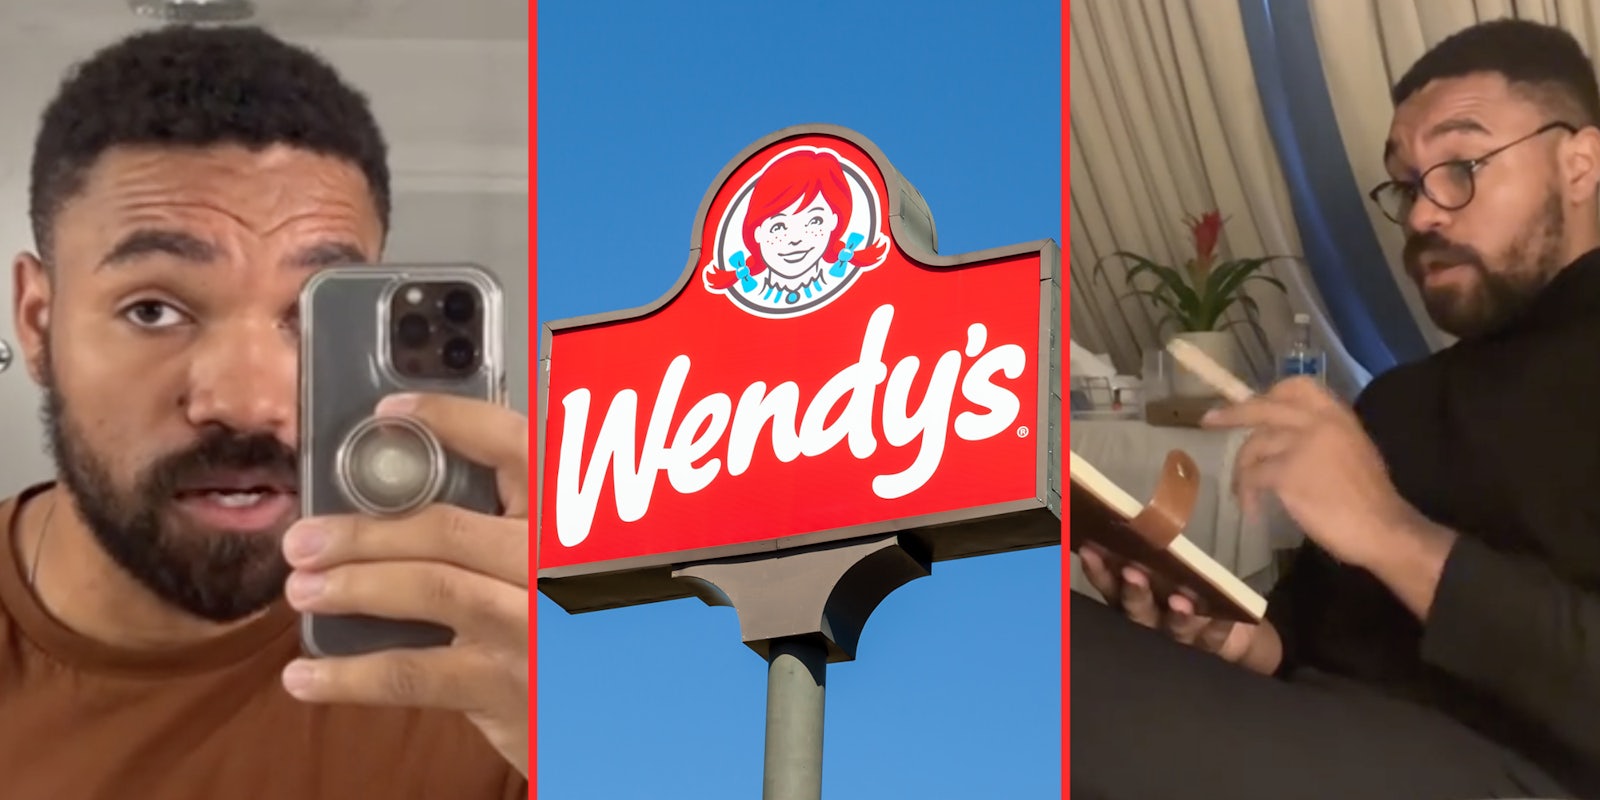 Man with phone in front of face(l), Wendy's sign(c), Classy man(r)